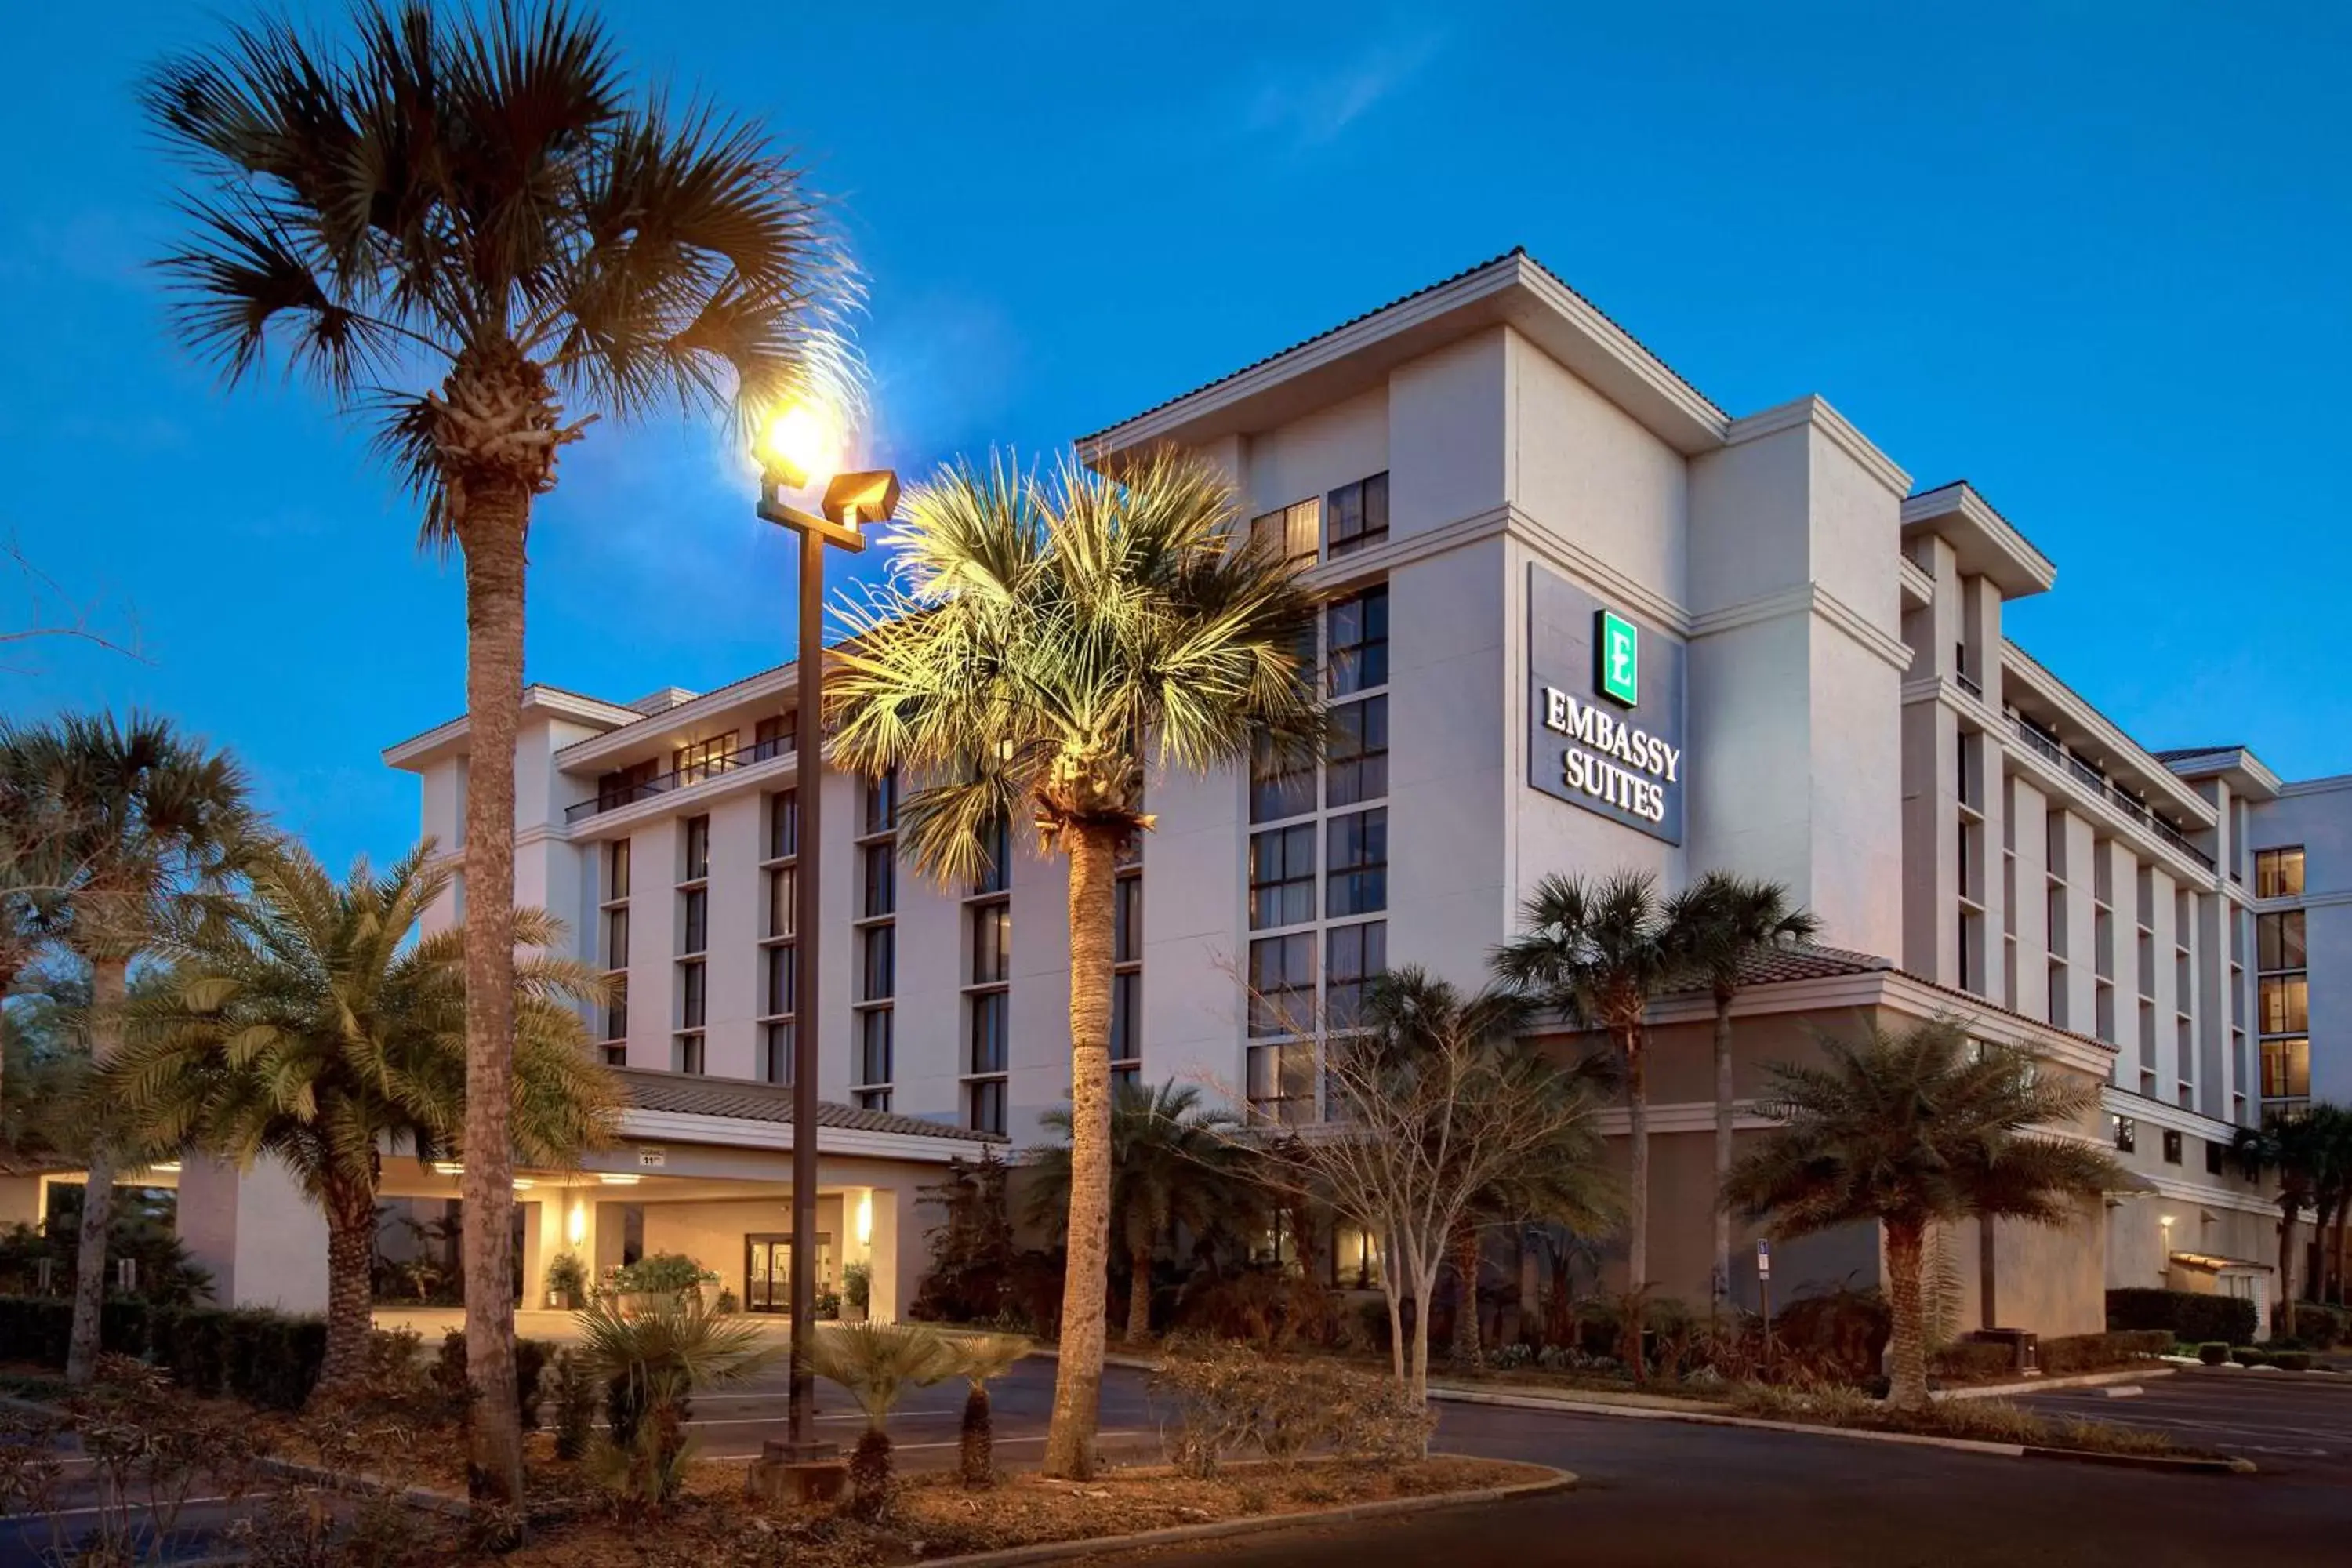 Property Building in Embassy Suites by Hilton Jacksonville Baymeadows